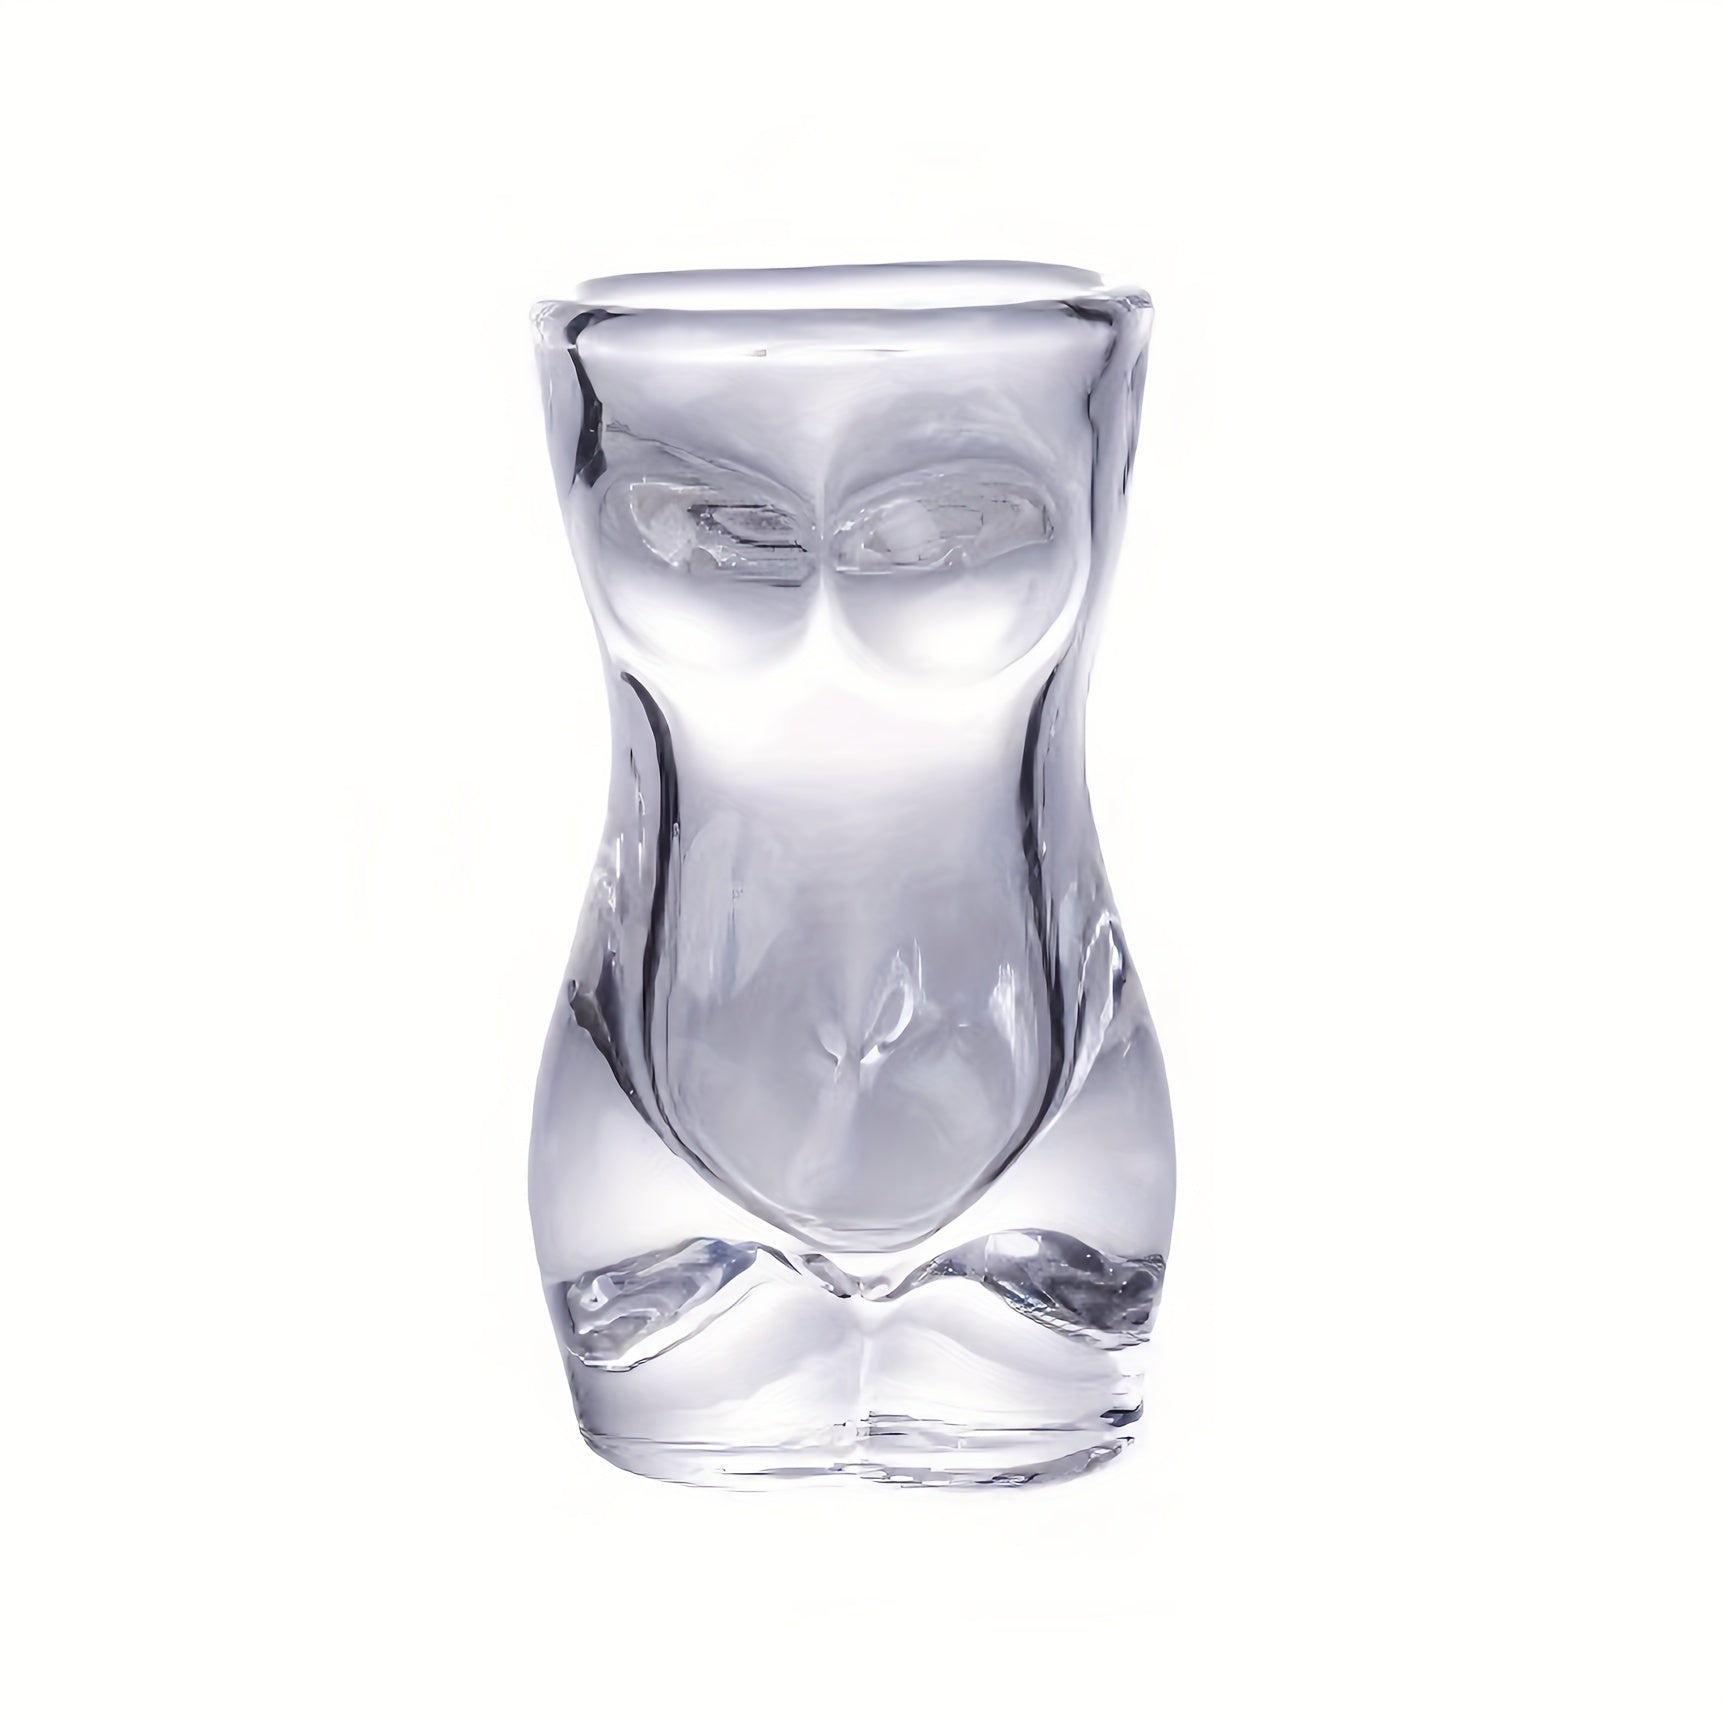 1pc, Sexy Beauty Drinking Glass, Bikini Clear Wine Glass, Creative Cocktail Glasses, Drinking Cups, For Bar, Pub, Club, Restaurant, Home Use, Summer Drinkware Accessories - Le Coin Du Barman : Le Spécialiste Des Cocktails